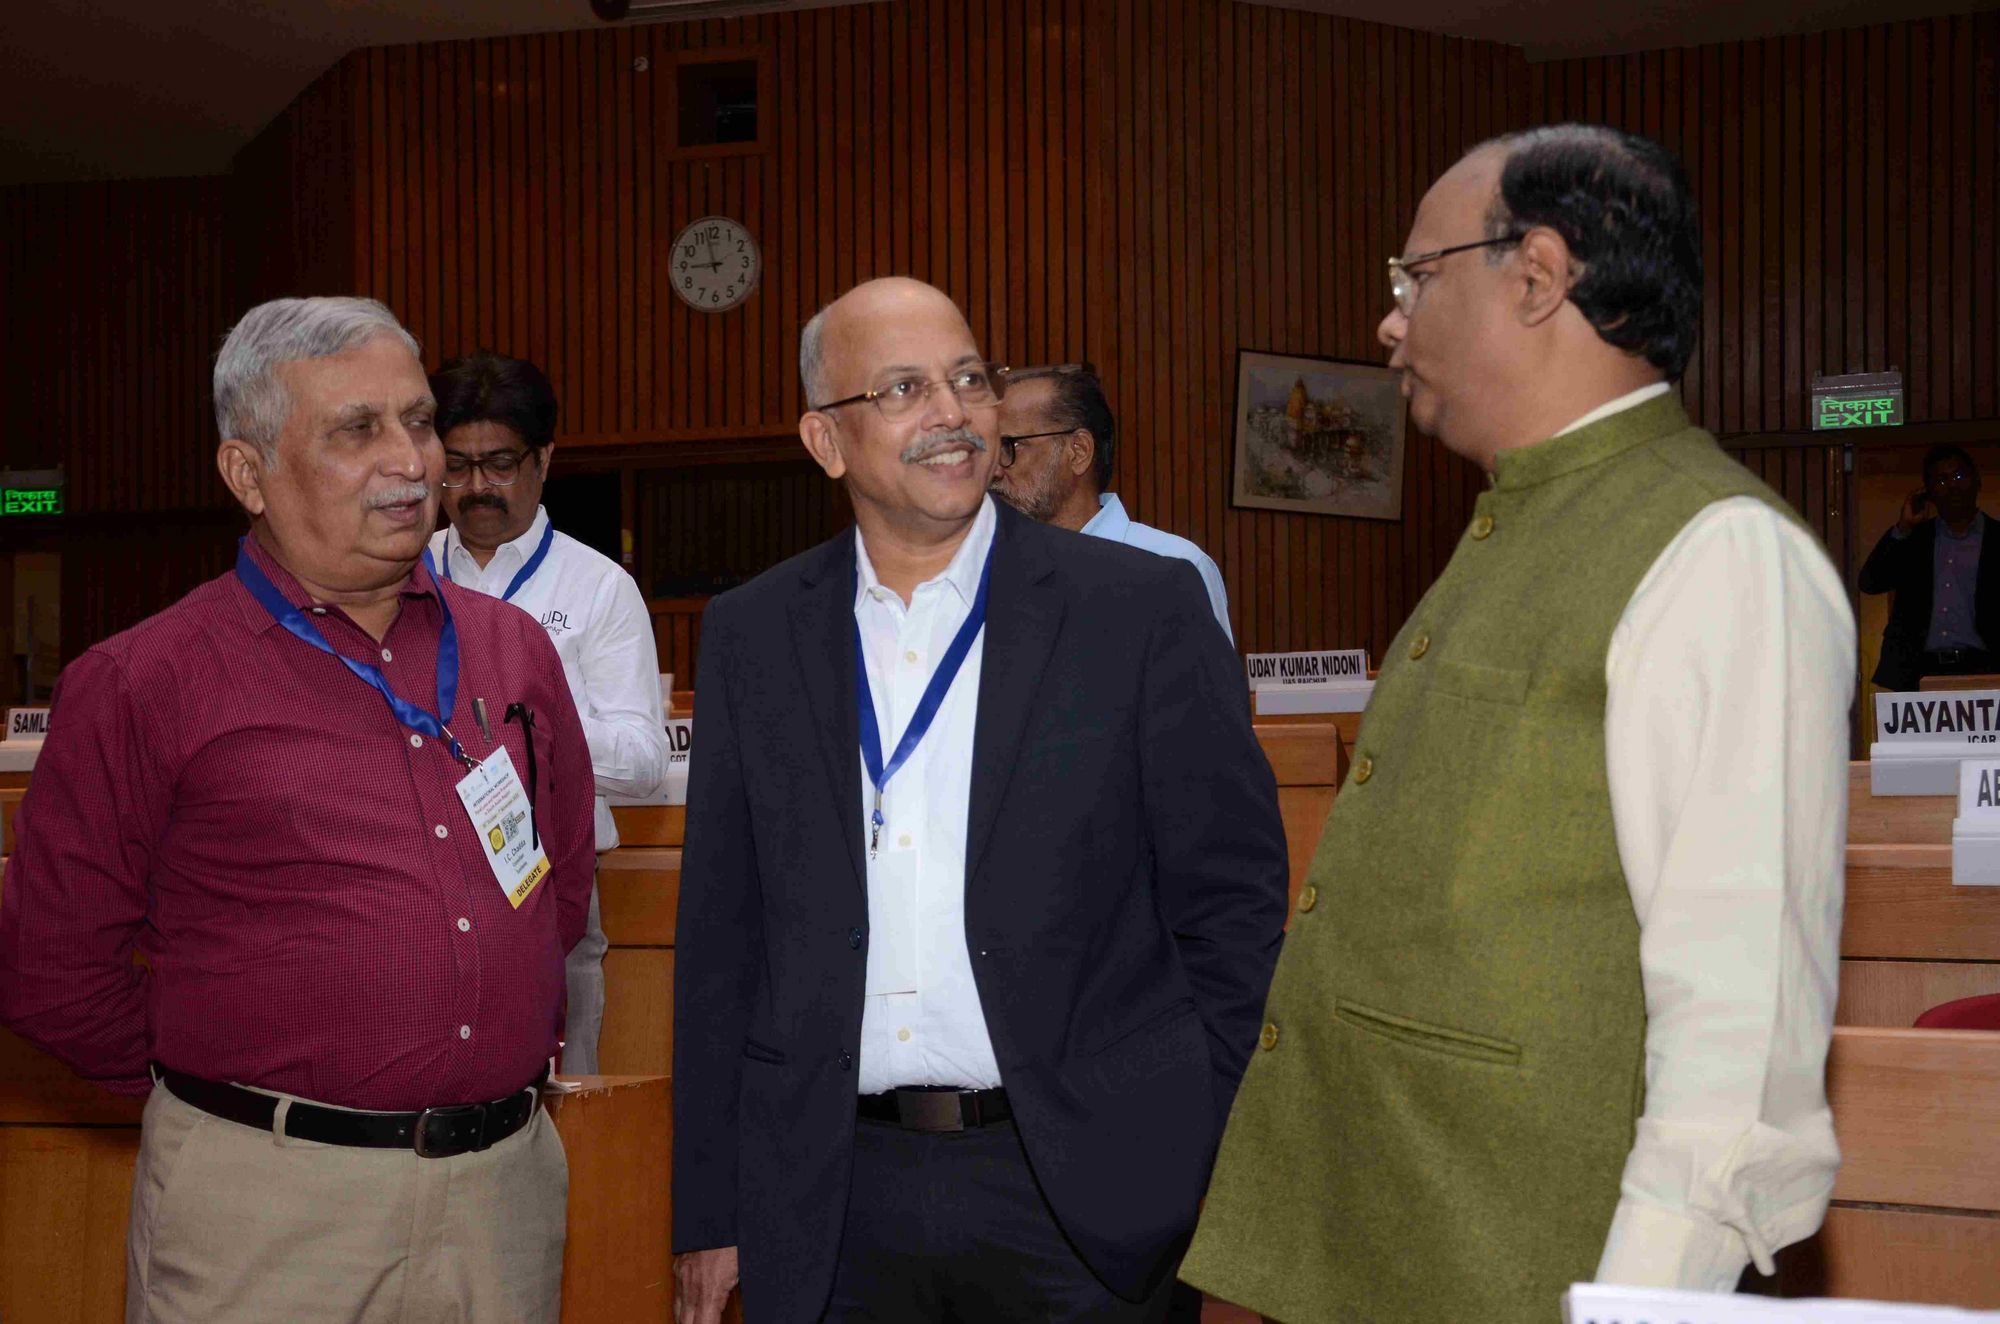 Mr IC Chadda, consultant, Mr U. Kumar, UPL Limited, and Dr Nachiket Kotwaliwale, Director Central Institute of Post-Harvest Engineering and Technology at ICAR, discussing during tea break.